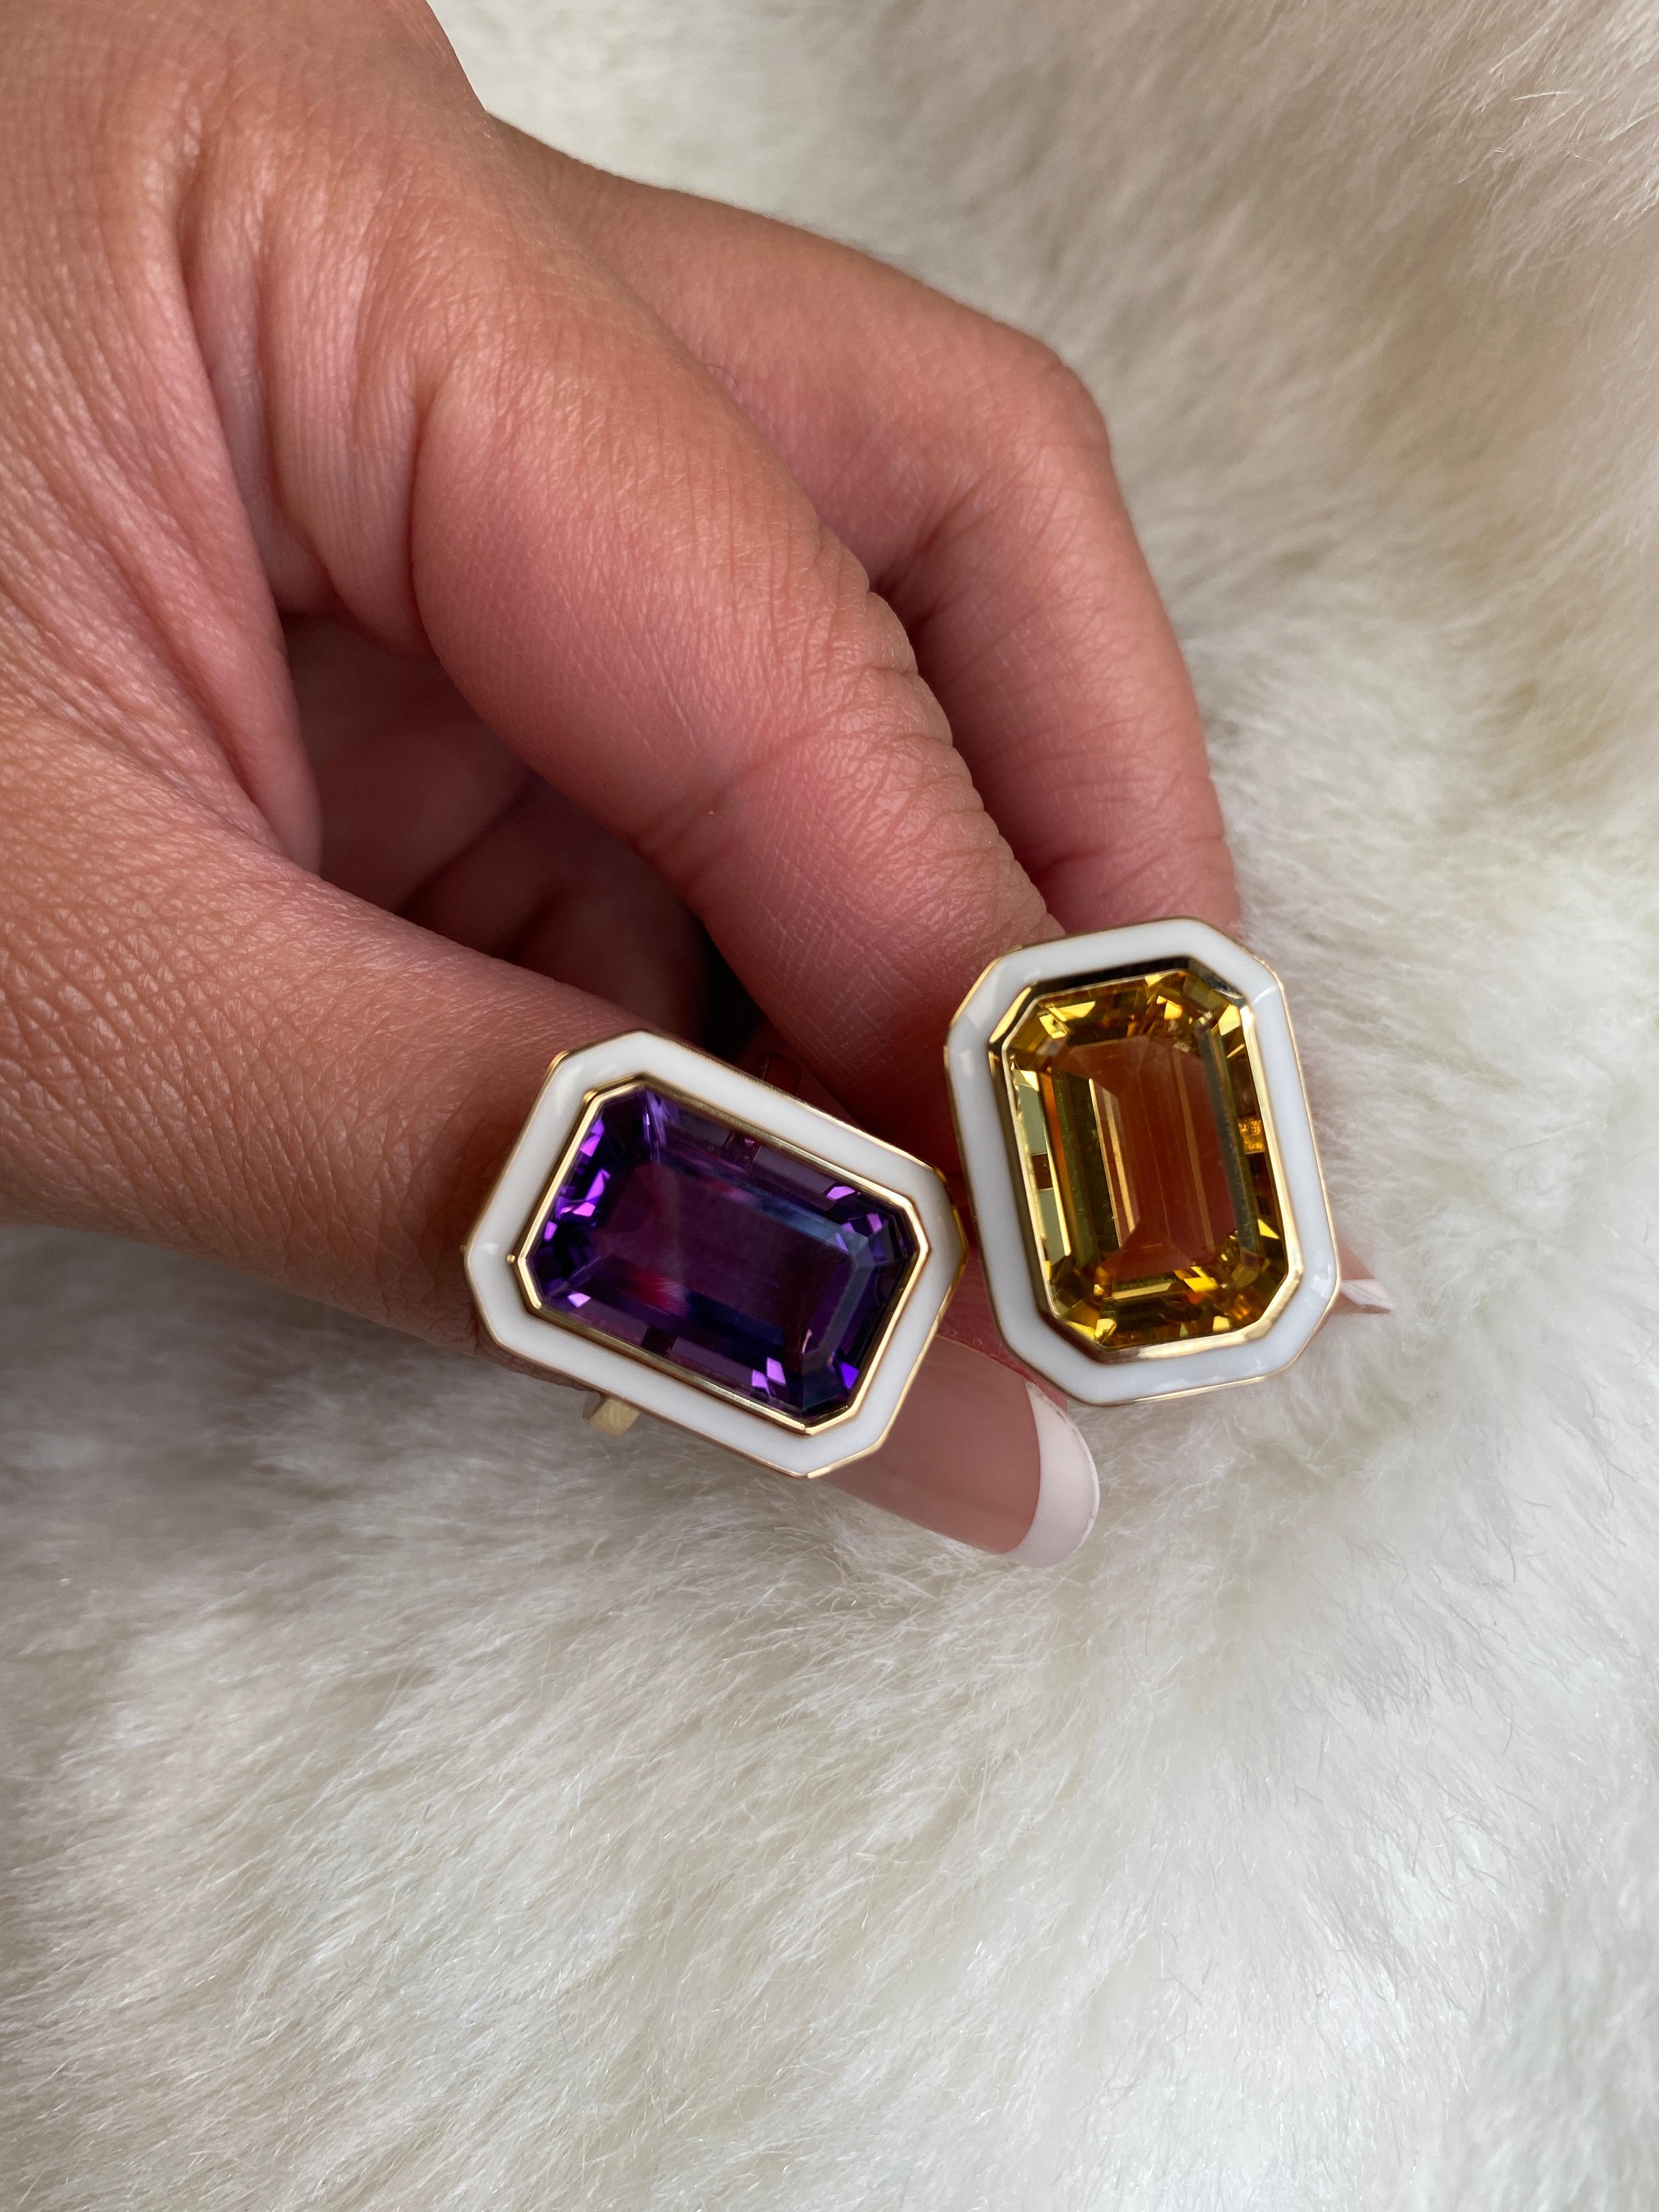 This is a unique combination of Citrine and White enamel. If you want to make a statement this is the perfect ring to do it! From our ‘Queen’ Collection, it was inspired by royalty, but with a modern twist. The combination of enamel, and Citrine